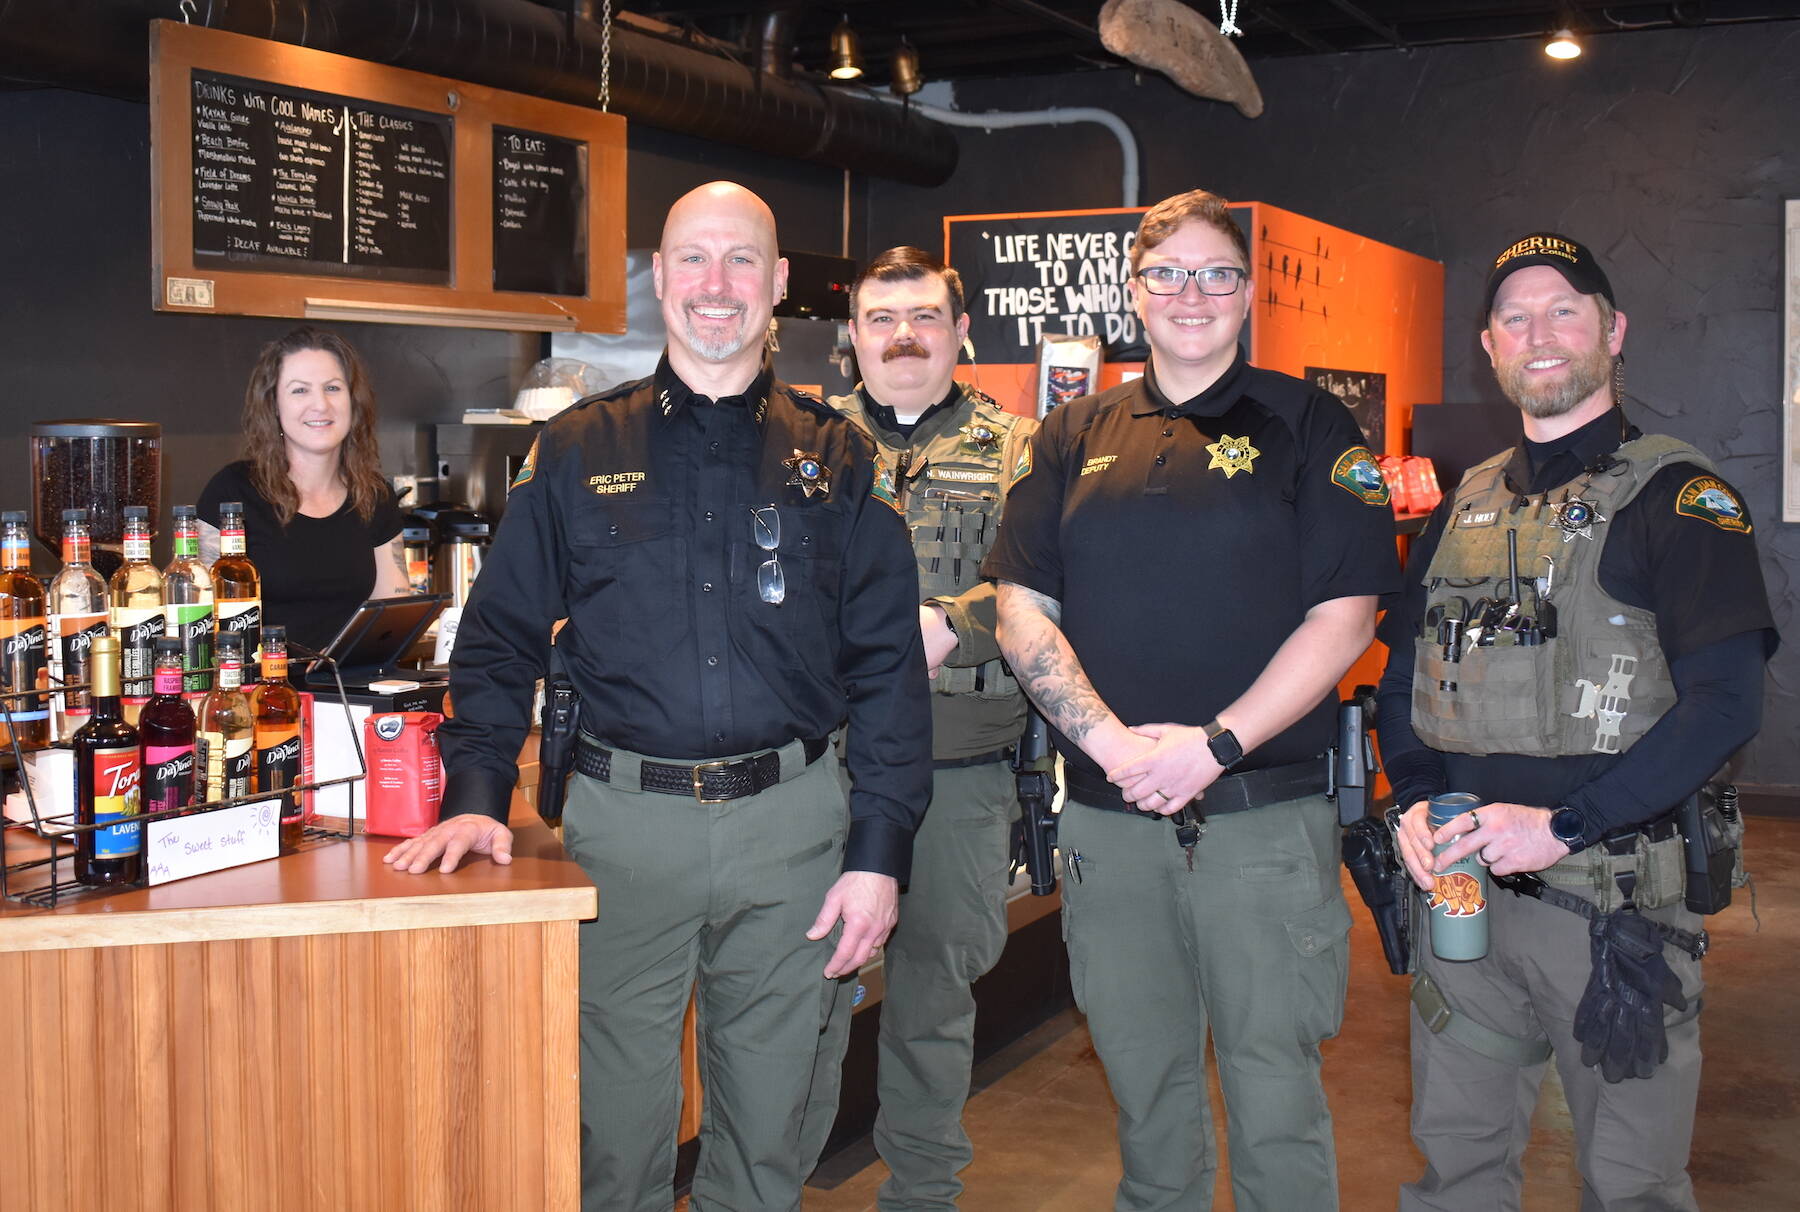 Kelley Balcomb-Bartok Staff photo
Sheriff Eric Peter is flanked by 13 Ravens Coffee owner Liberty Miller (left), and officers Nick Wainwright, Rion Brandt, and Jay Holt during the department’s first “Coffee With A Cop” event held January 28 in Friday Harbor.